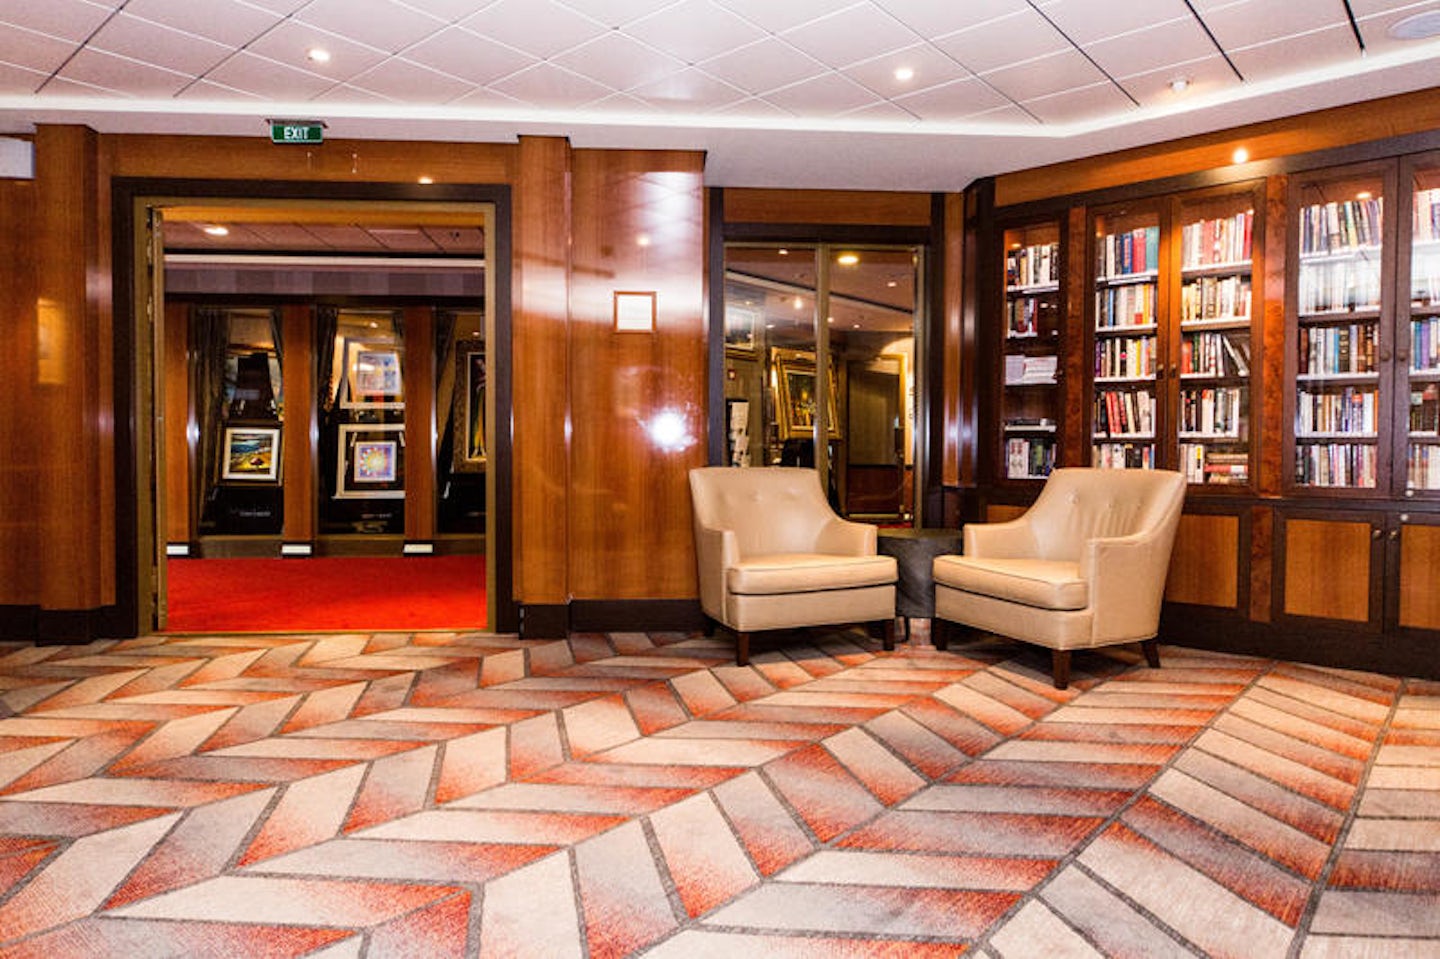 SS America Library on Pride of America